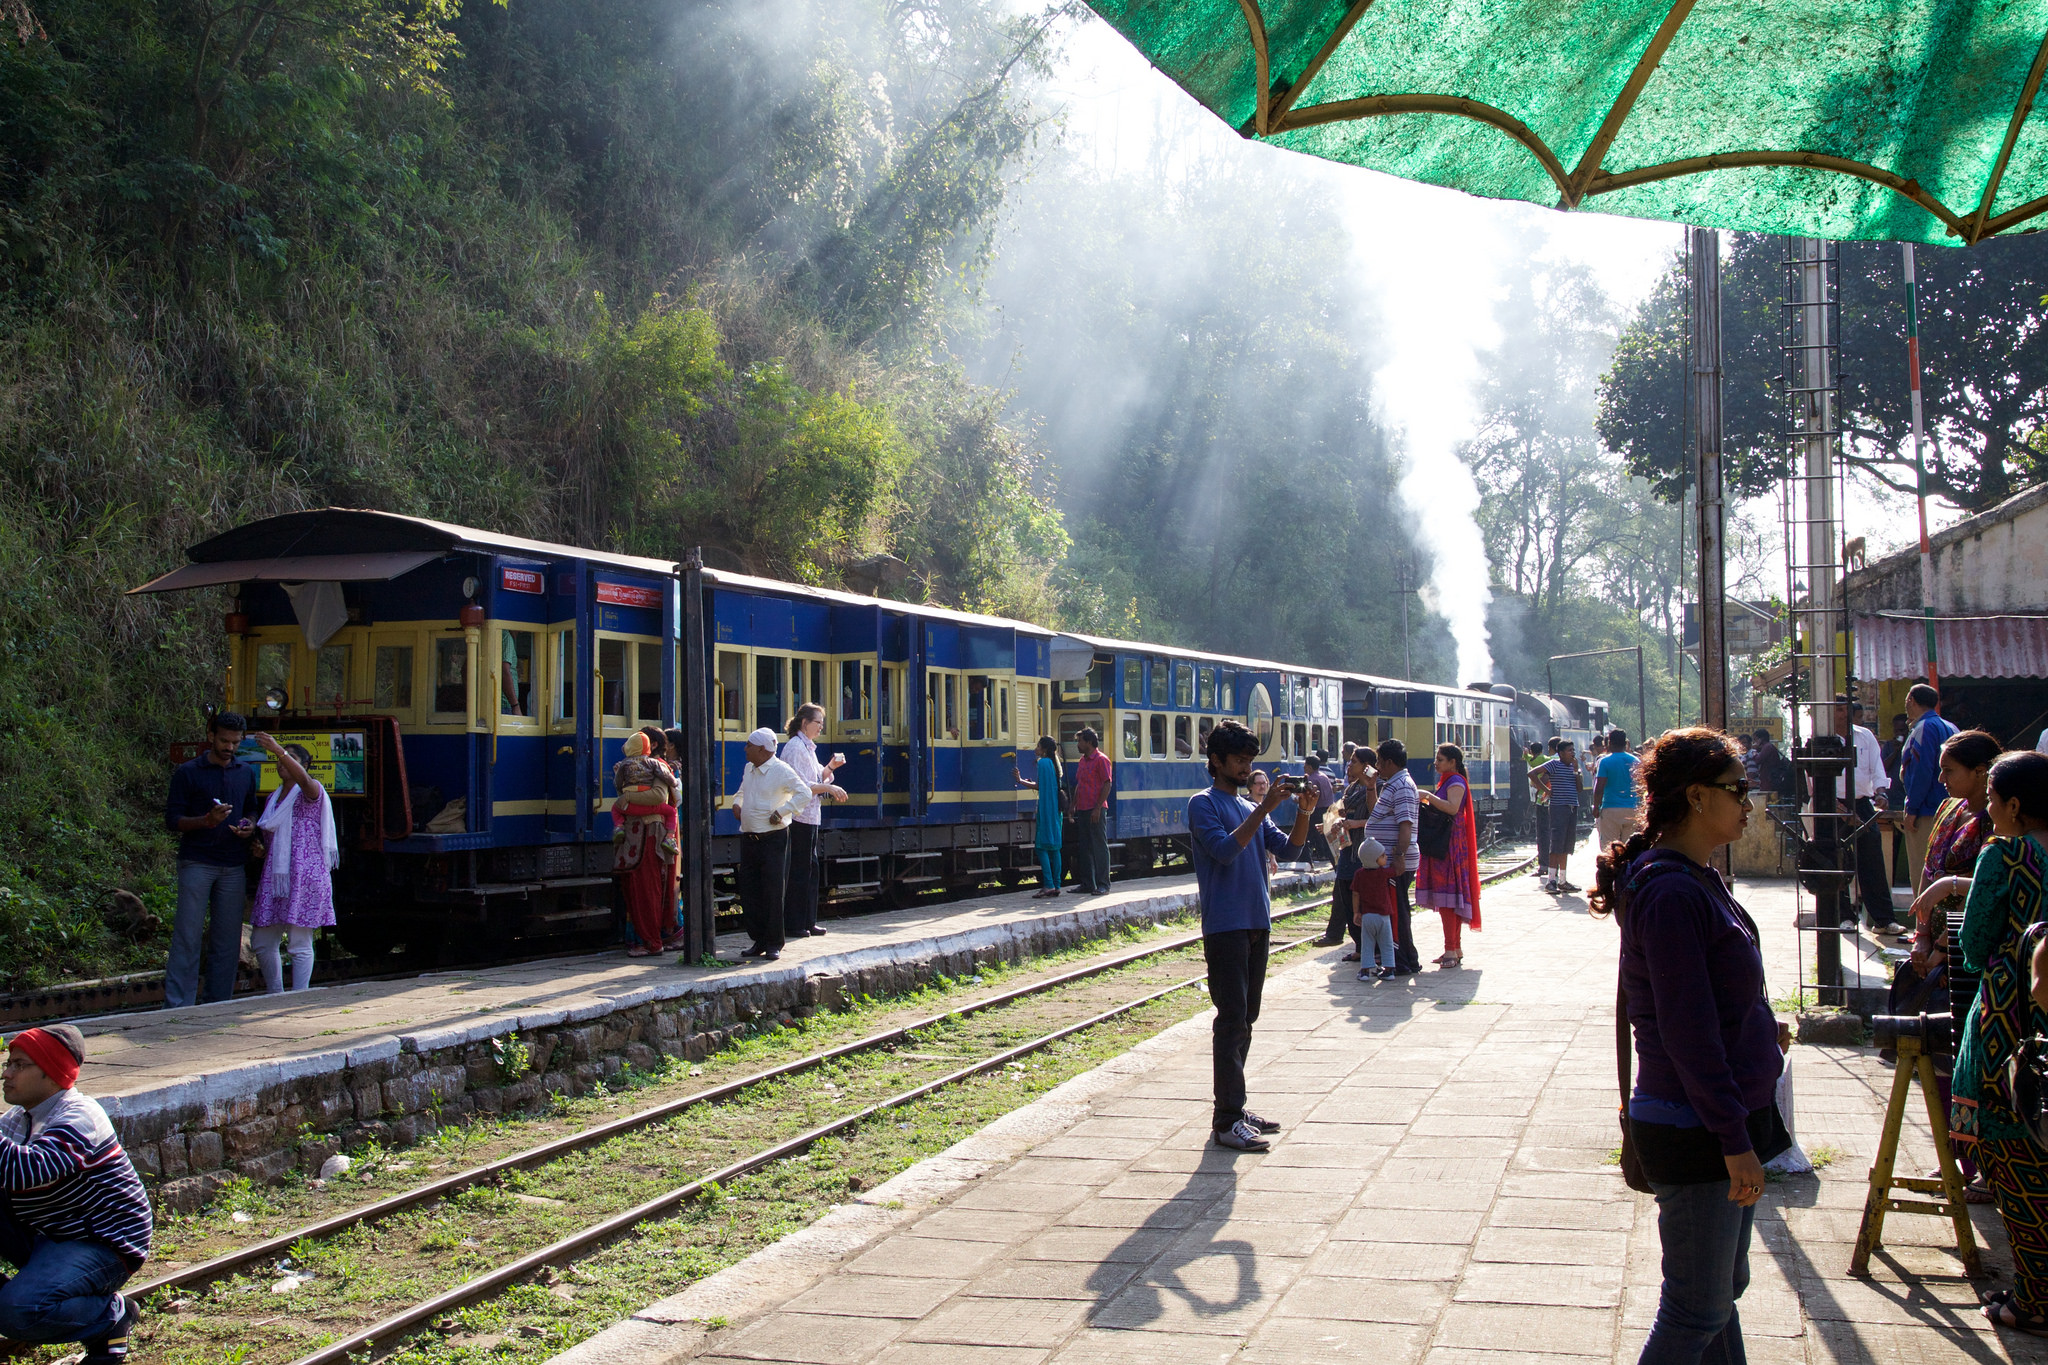 The Nilgiri Mountain Railway, cutting across the lush green hill side, with the engine at the back, pushing the train up the hills